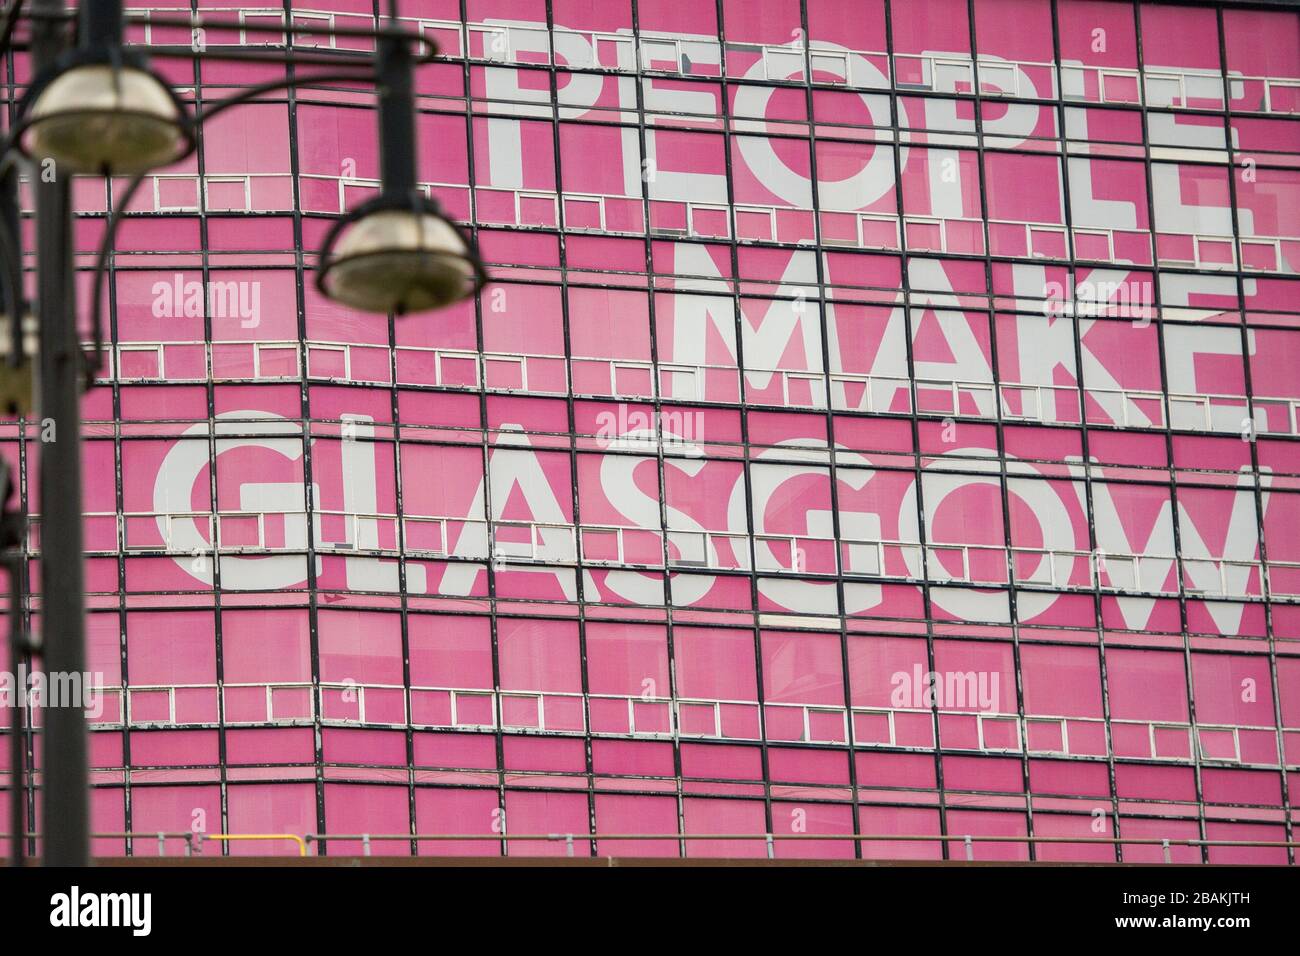 Glasgow, UK. 27 March 2020.   Pictured: Sign on the side of the old Glasgow Building and Printing College, which displays, “PEOPLE MAKE GLASGOW”   The Coronavirus Pandemic has forced the UK Government to order a shut down of all the UK major cities and make people stay at home. Stock Photo